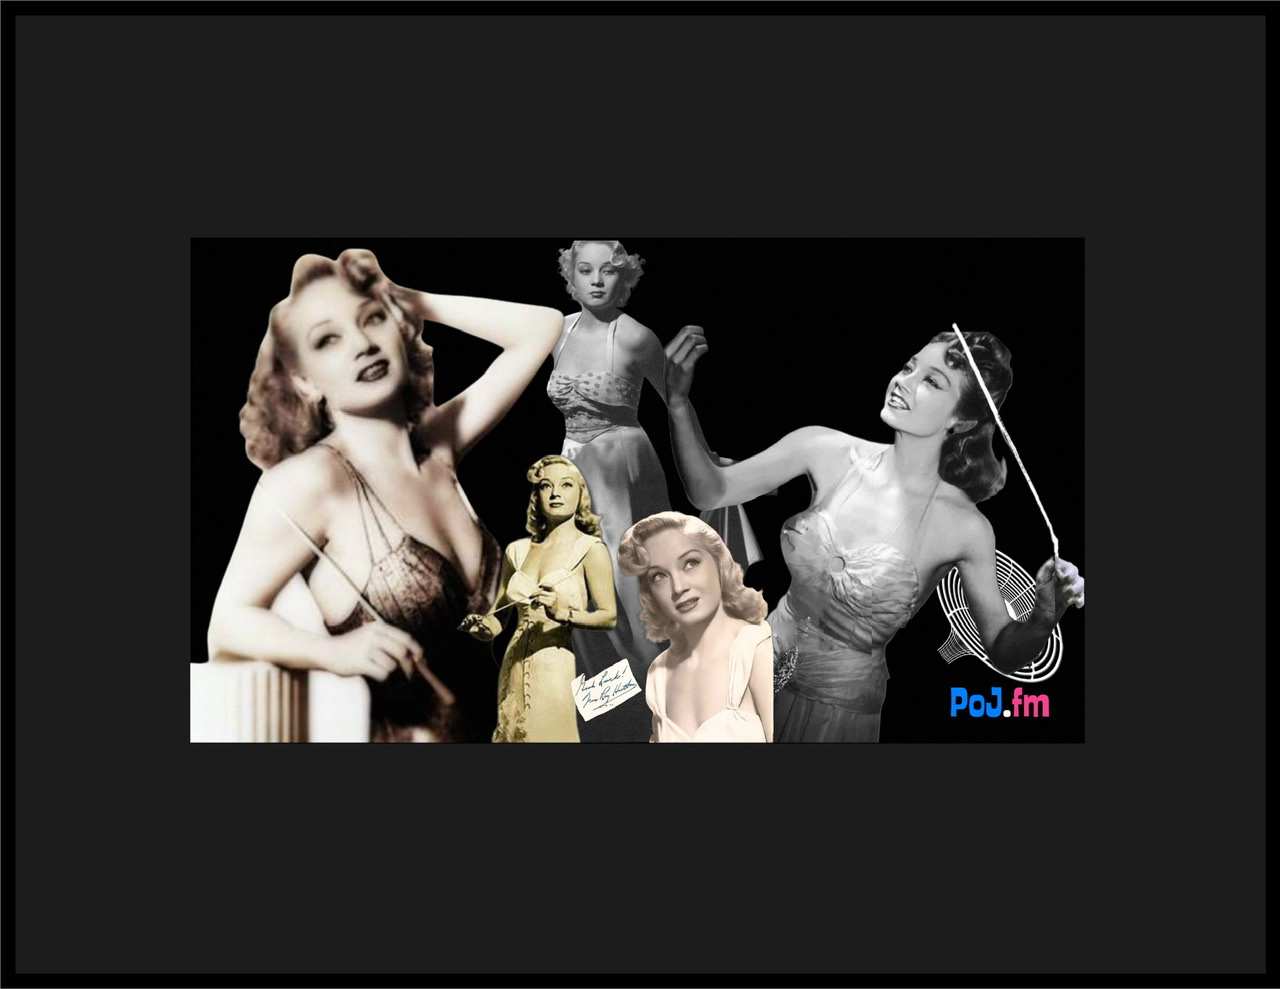 Compositing of five cutout photos of Ina Ray Hutton glamour photographs.